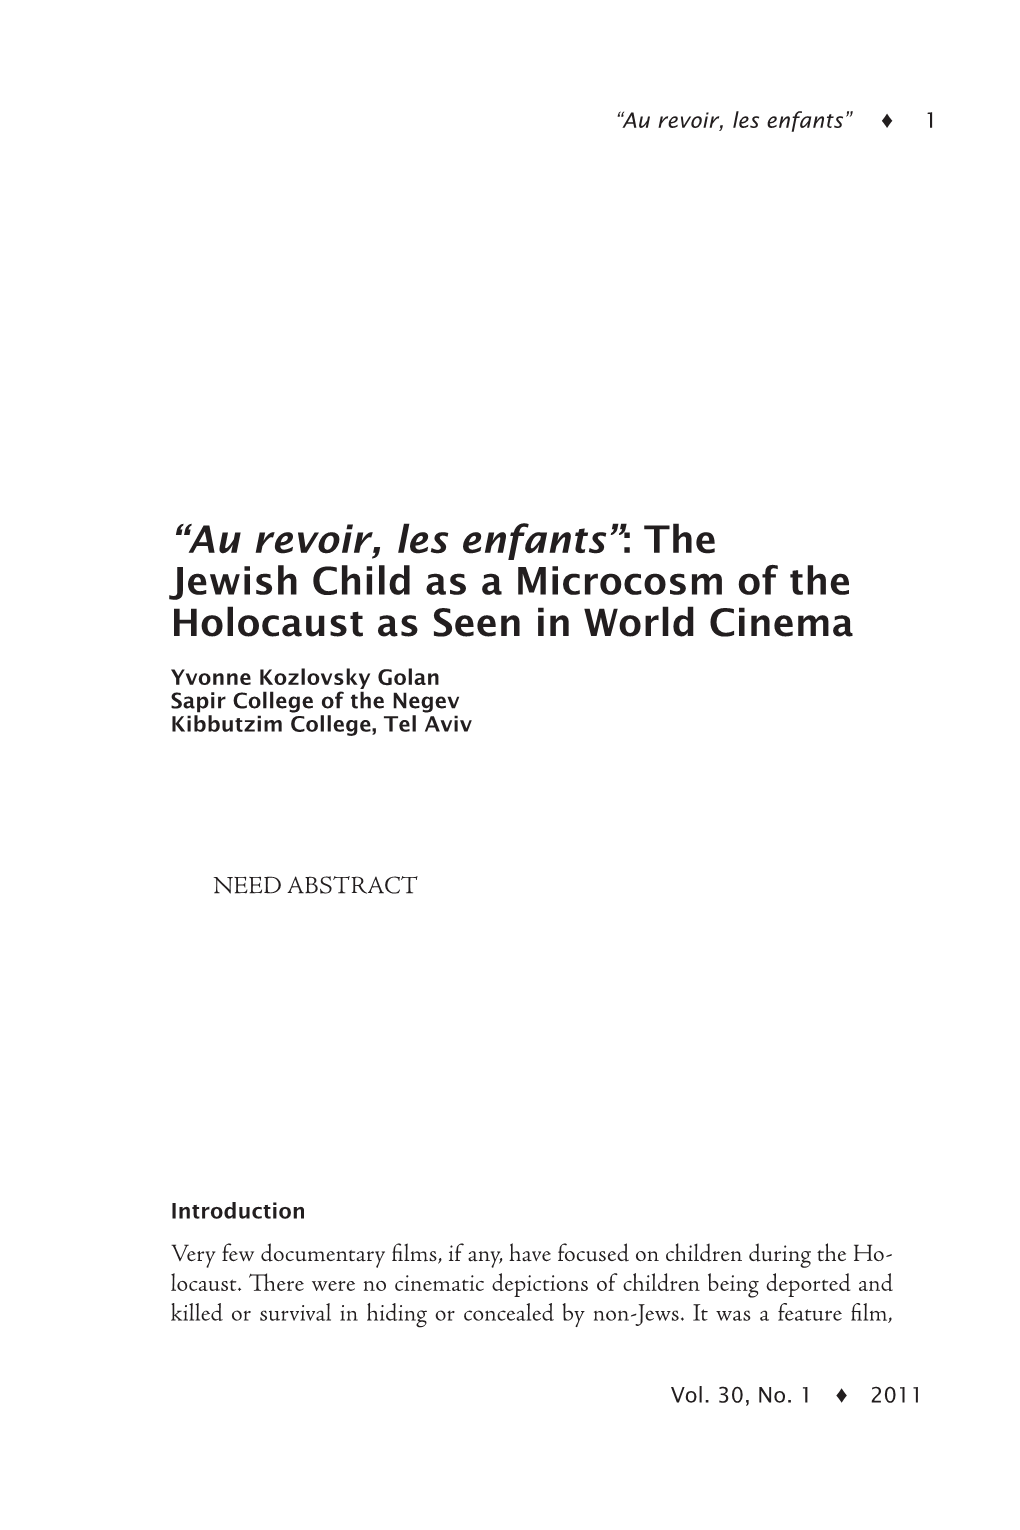 “Au Revoir, Les Enfants”: the Jewish Child As a Microcosm of the Holocaust As Seen in World Cinema